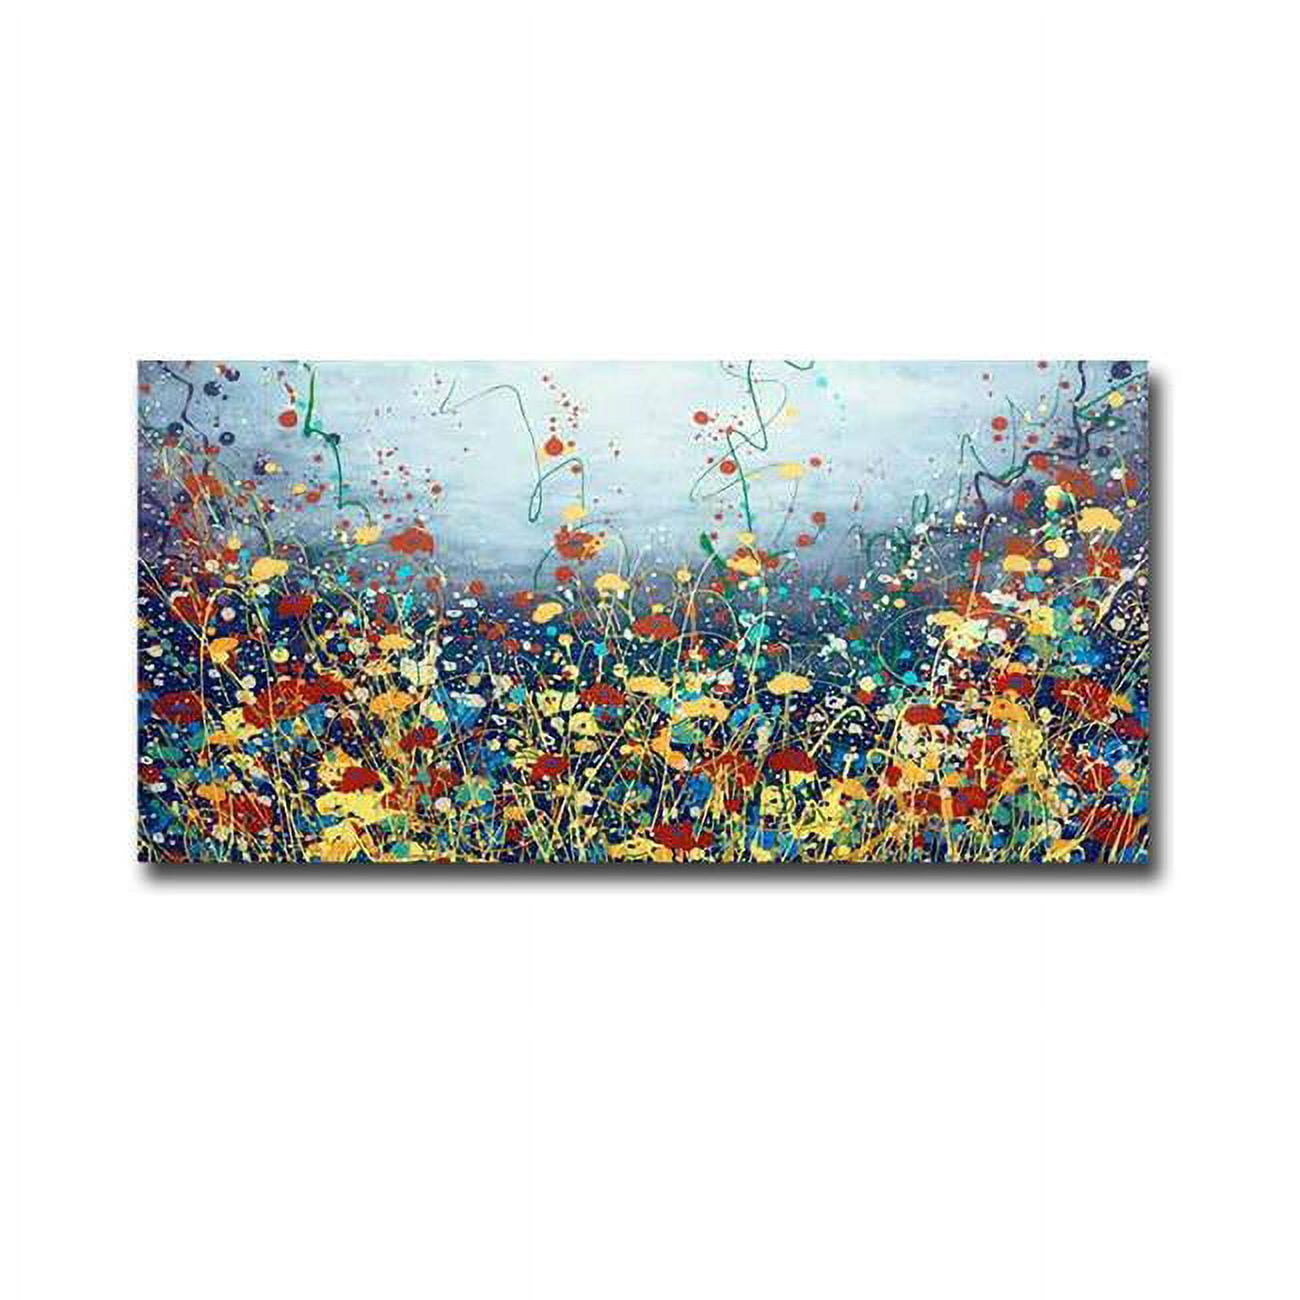 12246743eg Poem Flower By Daniel Lager Premium Gallery-wrapped Canvas Giclee Art - Ready To Hang, 12 X 24 In.